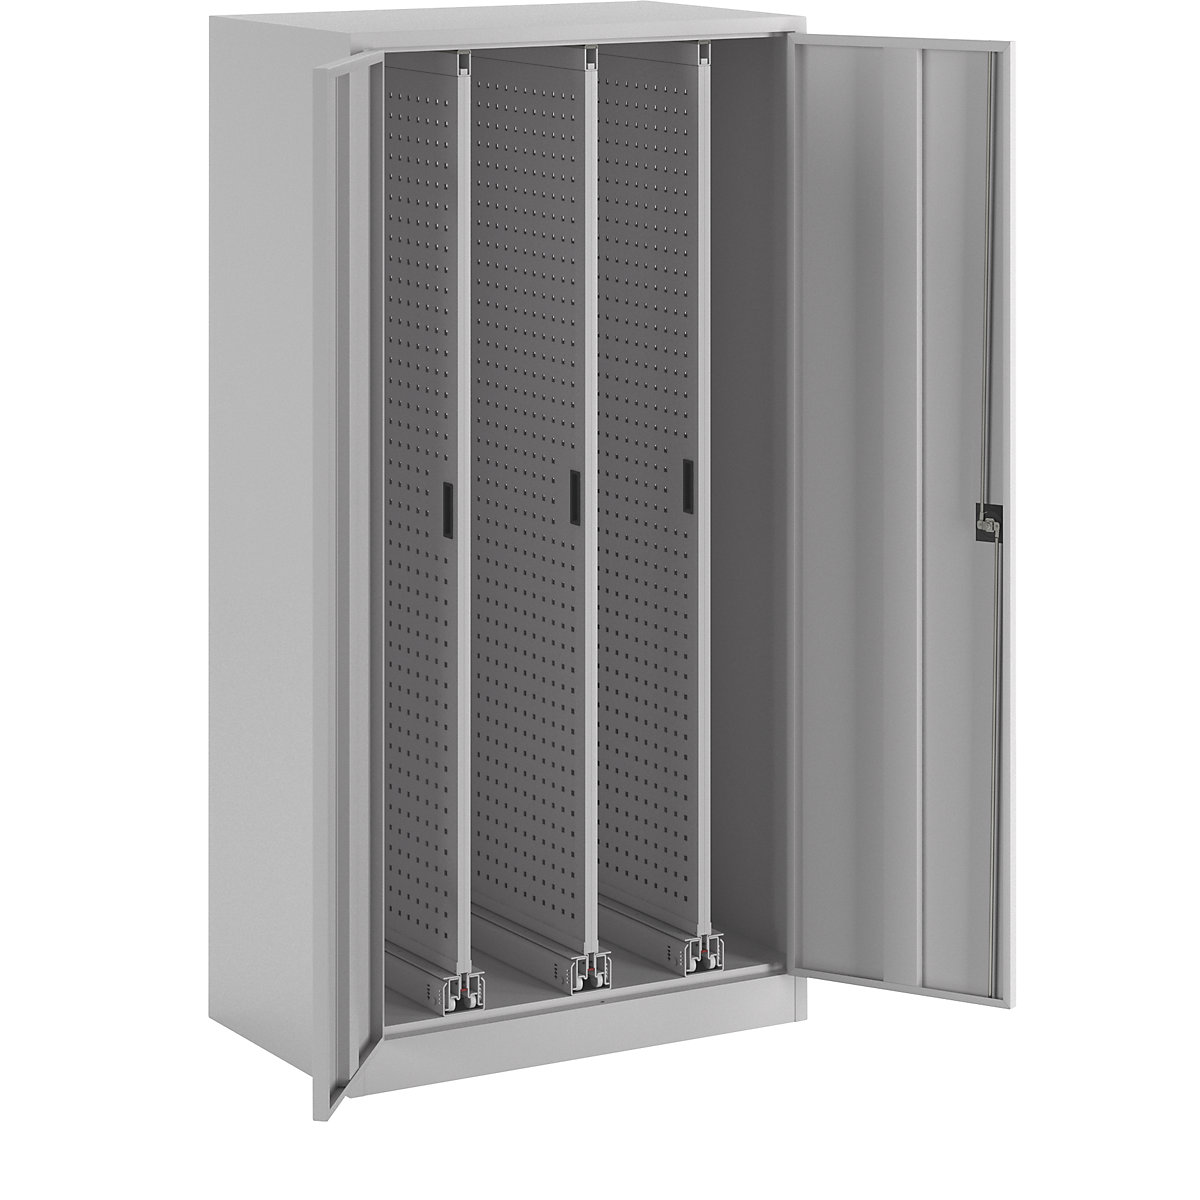 Vertical pull-out cupboard – Pavoy